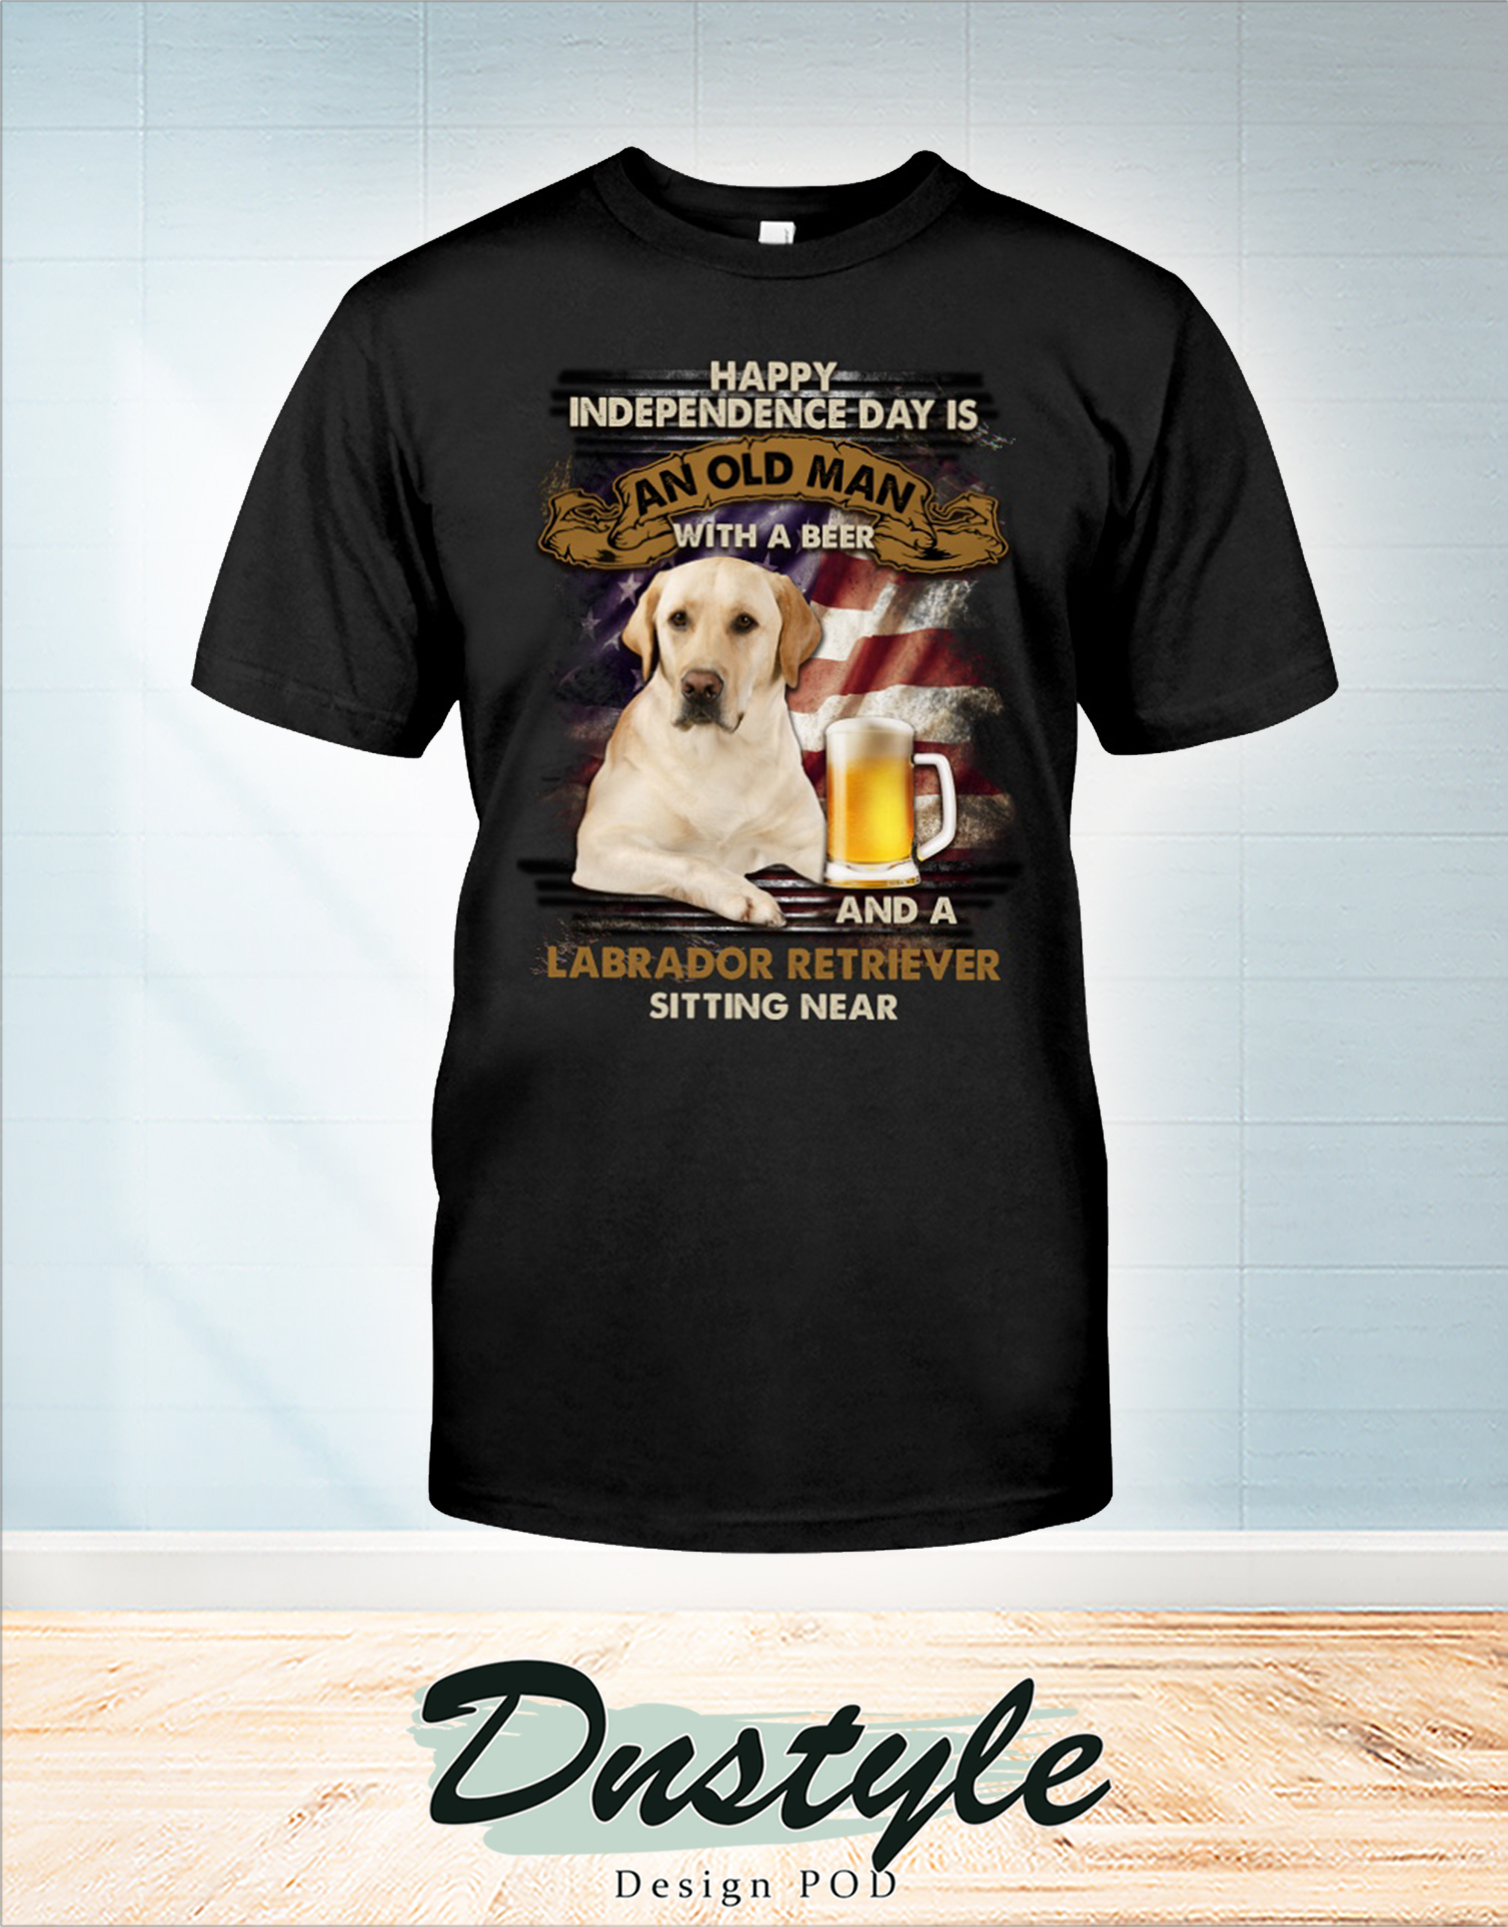 Happy independence day is an old man with a beer and a Labrador retriever sitting near t-shirt